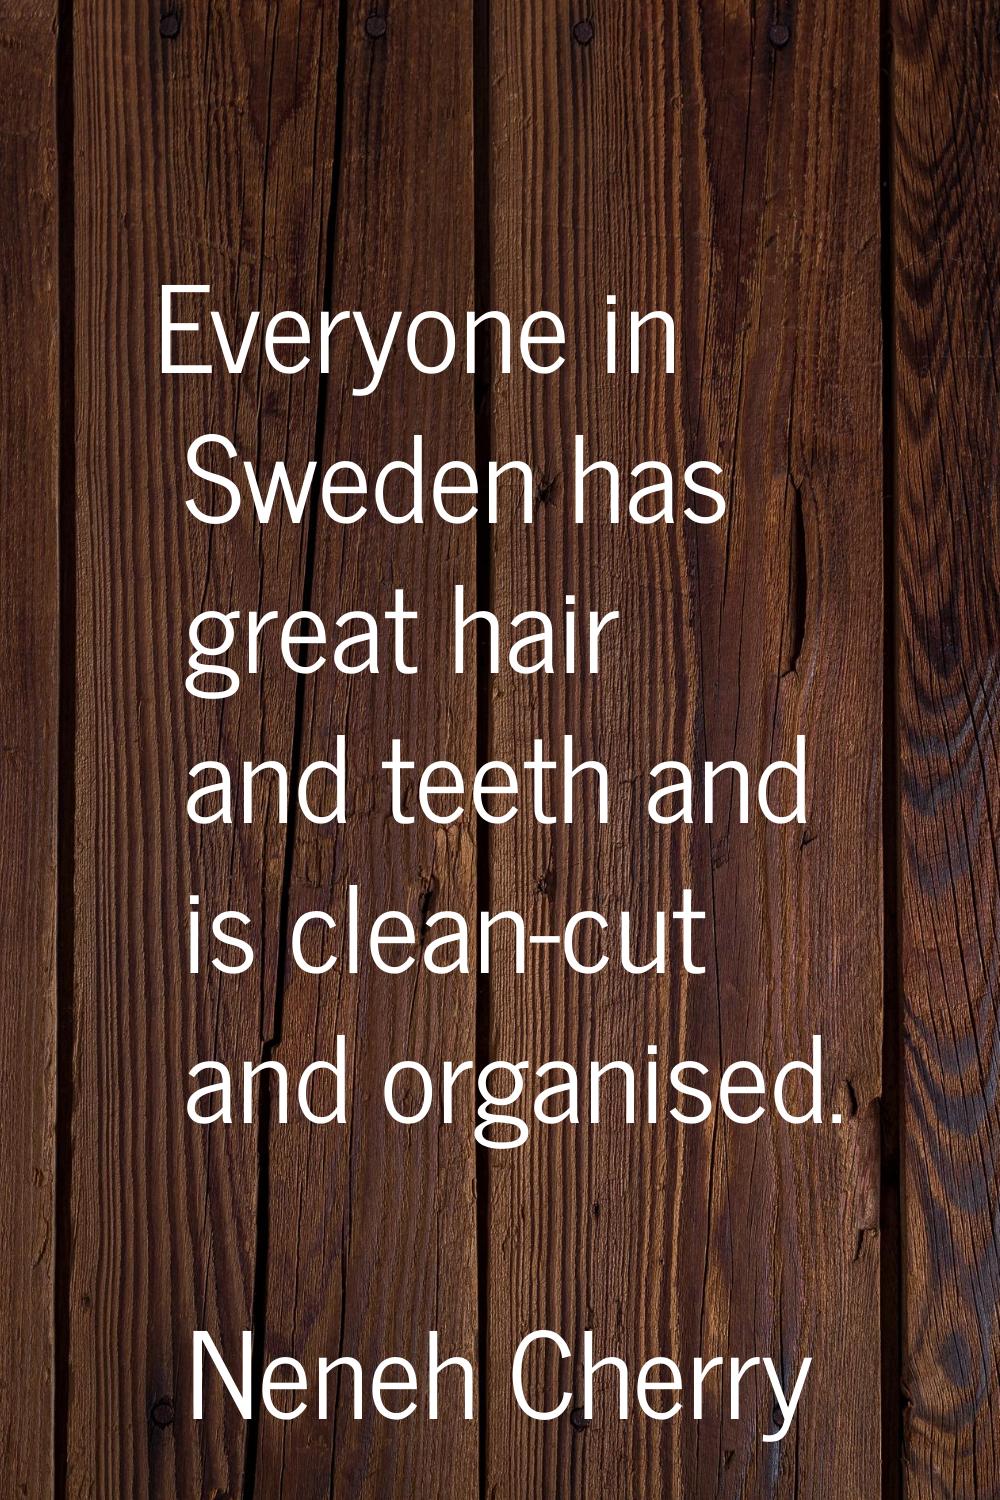 Everyone in Sweden has great hair and teeth and is clean-cut and organised.